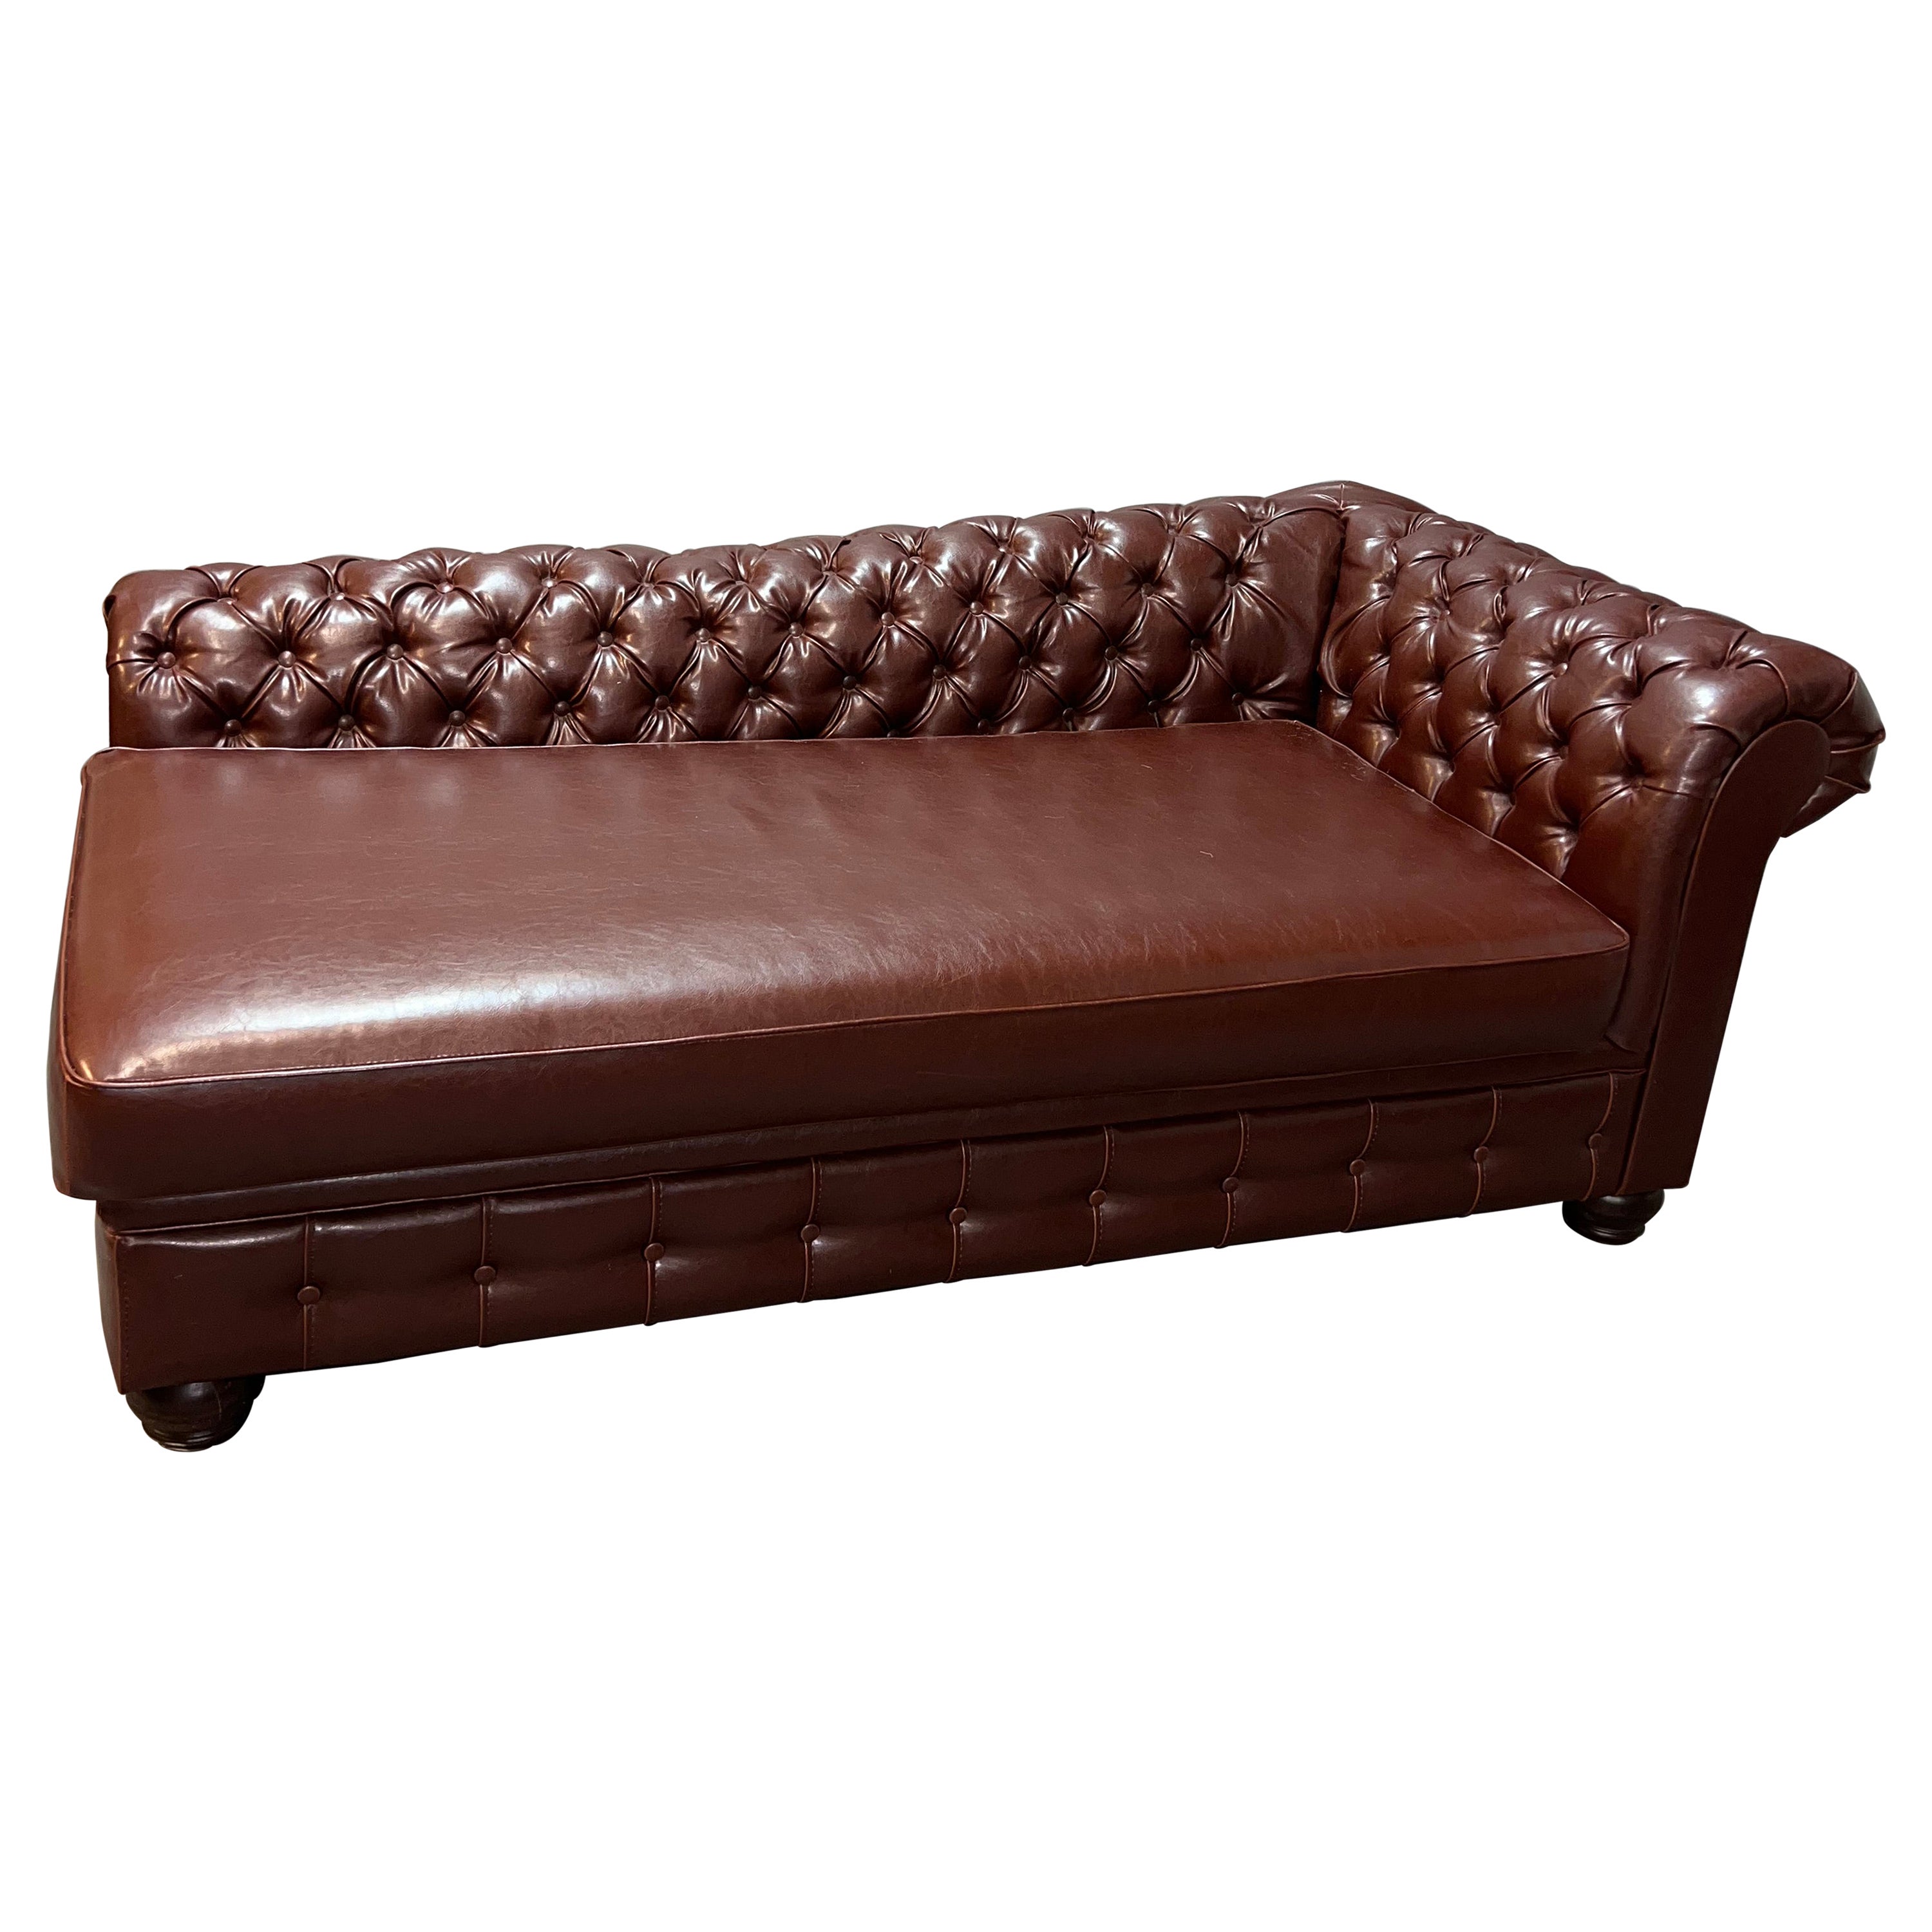 Lovely Vintage Chesterfield Brown Leather Looks Chaise Lounge Daybed Sofa